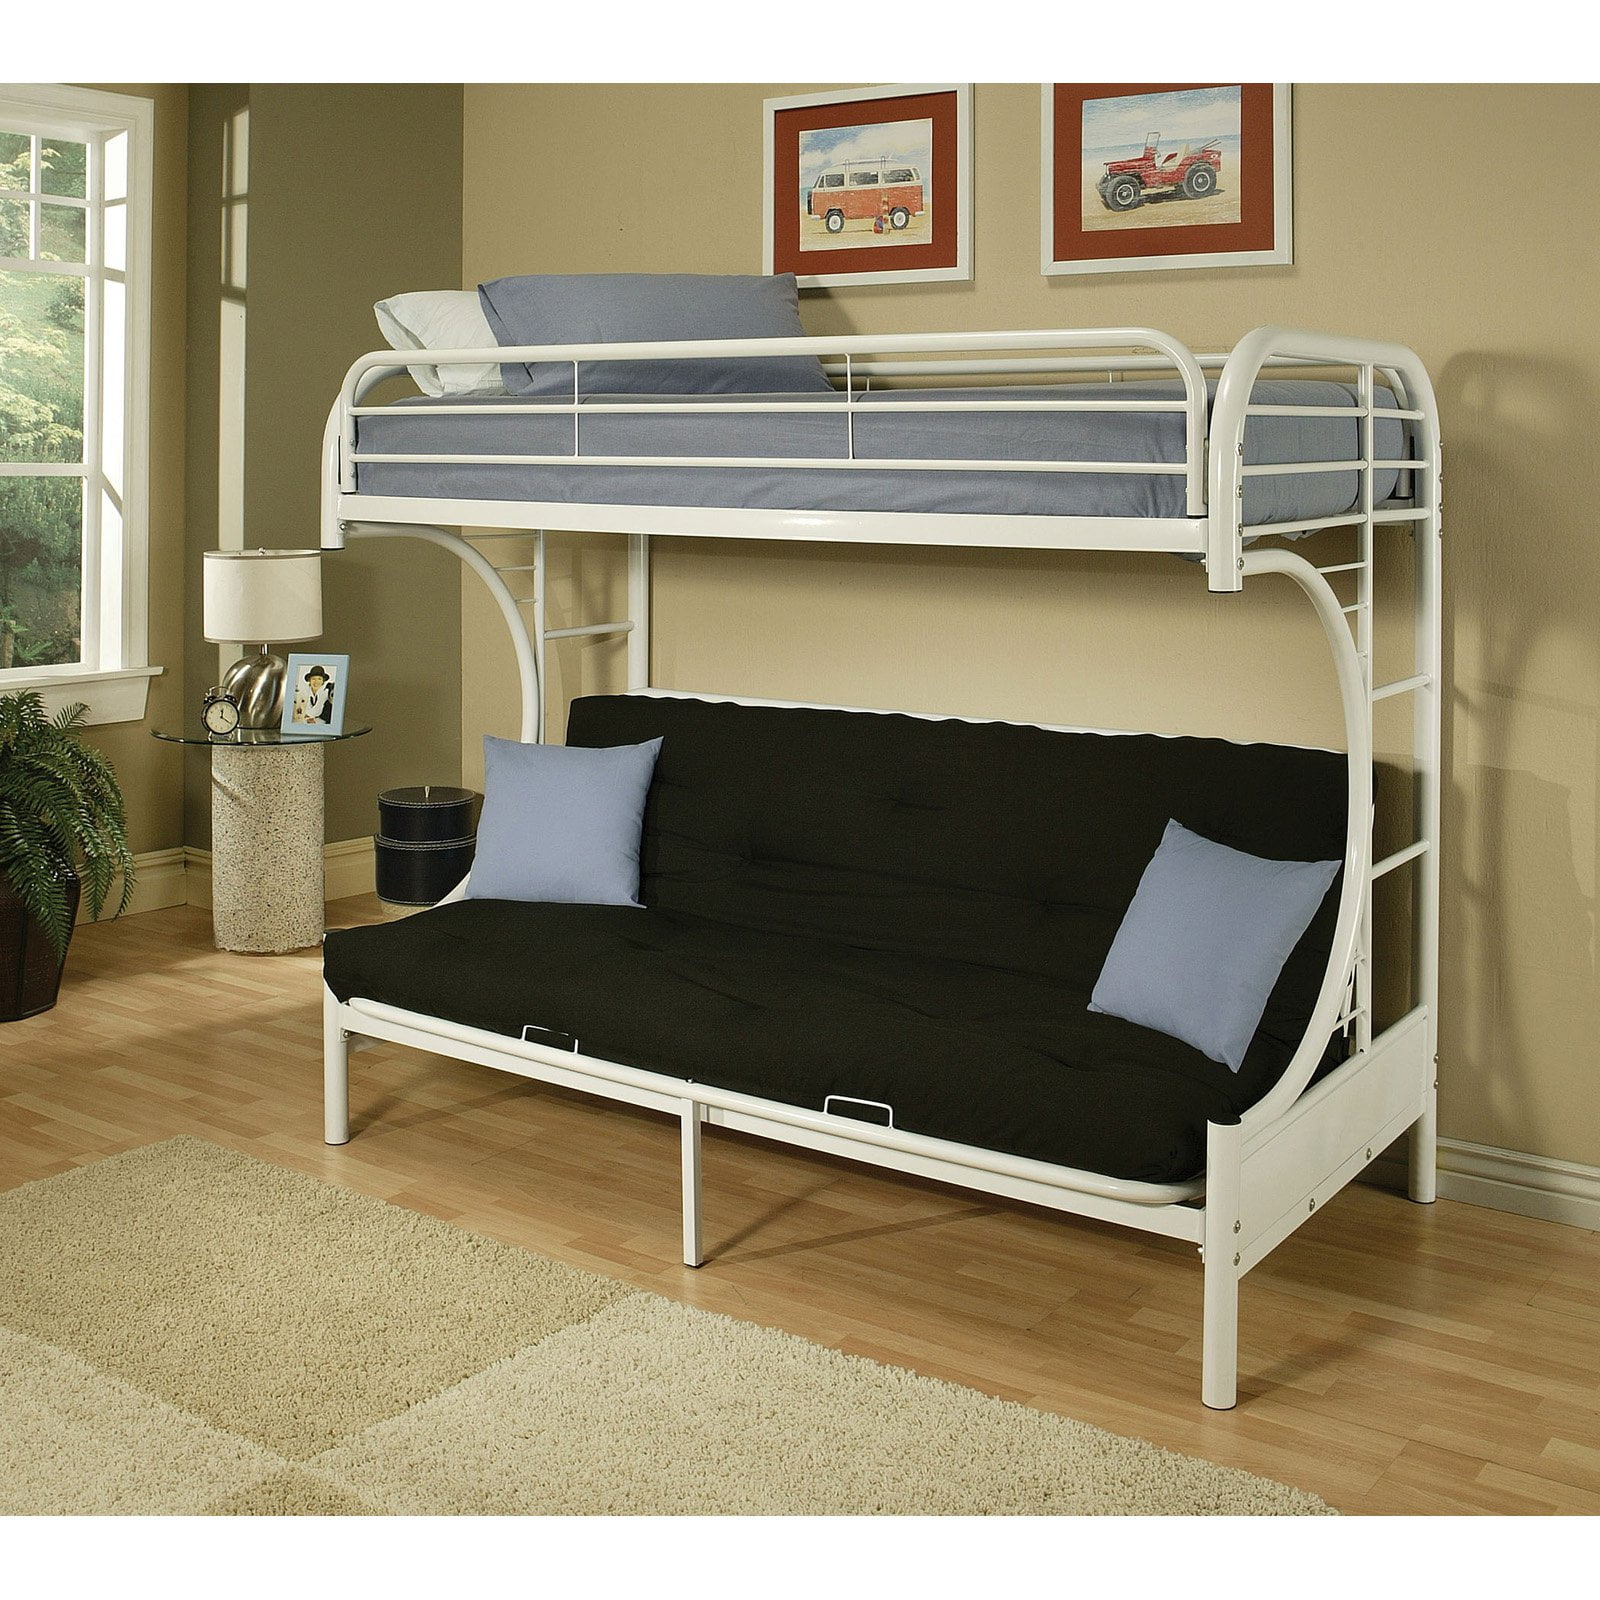 Eclipse Twin Over Full Futon Bunk Bed, Twin Over Full Futon Bunk Bed Wood